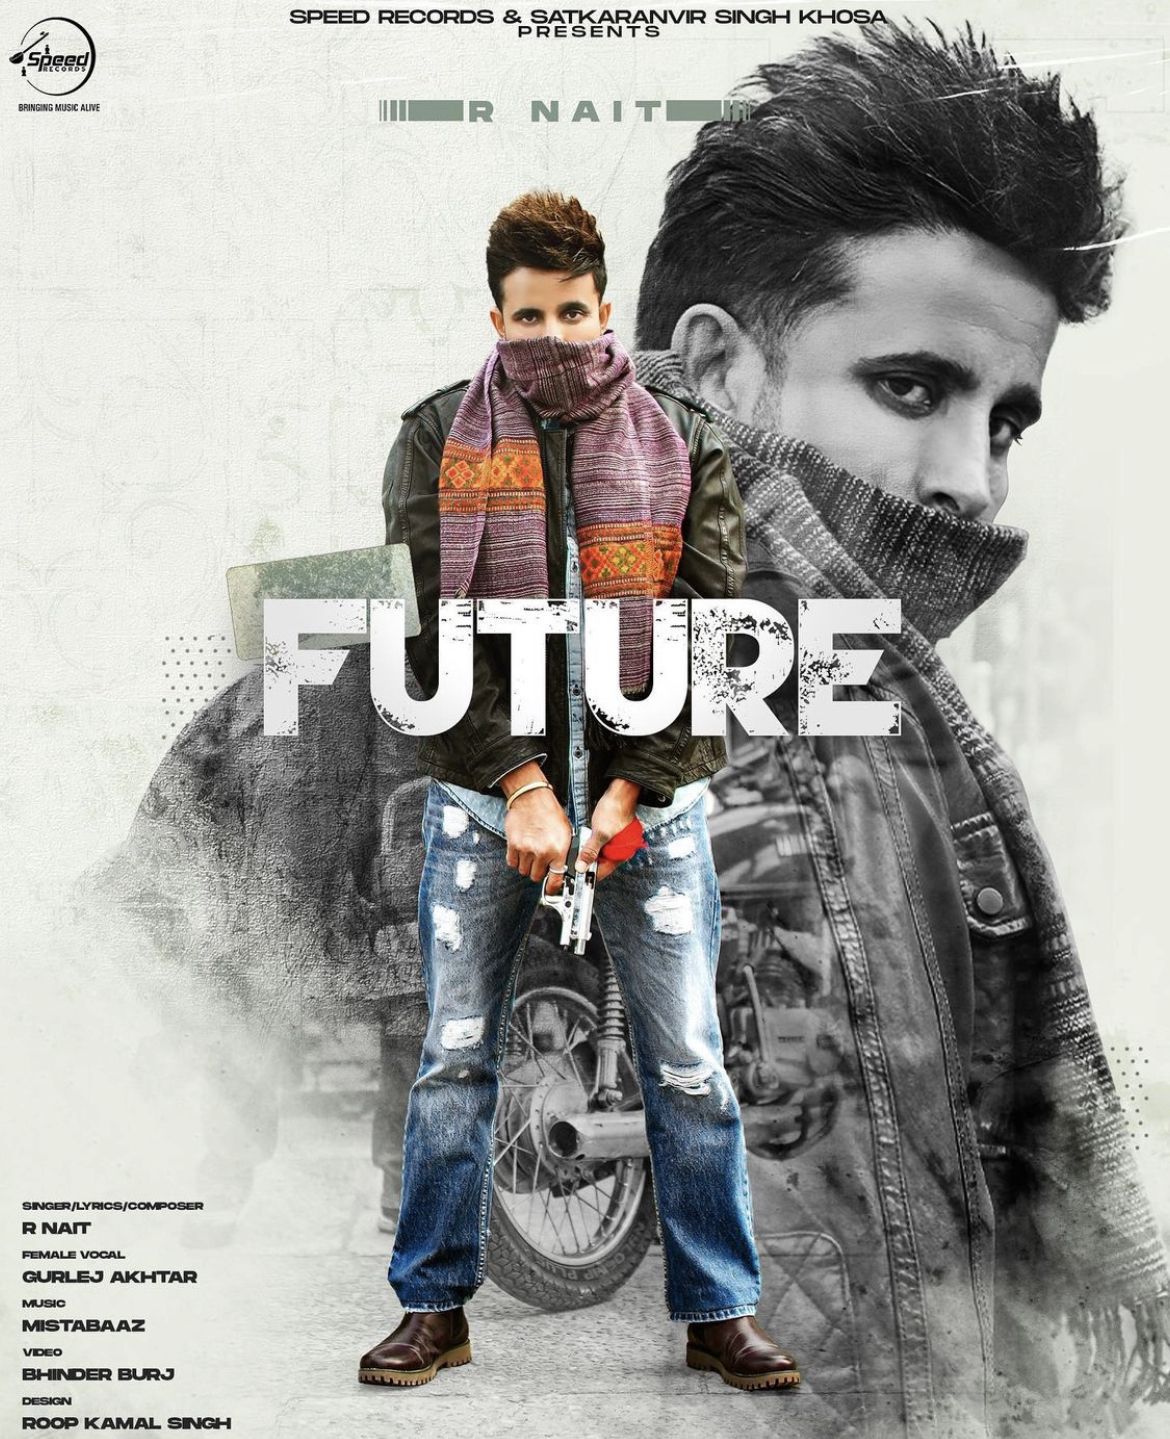 Future R Nait  Mp3 song download